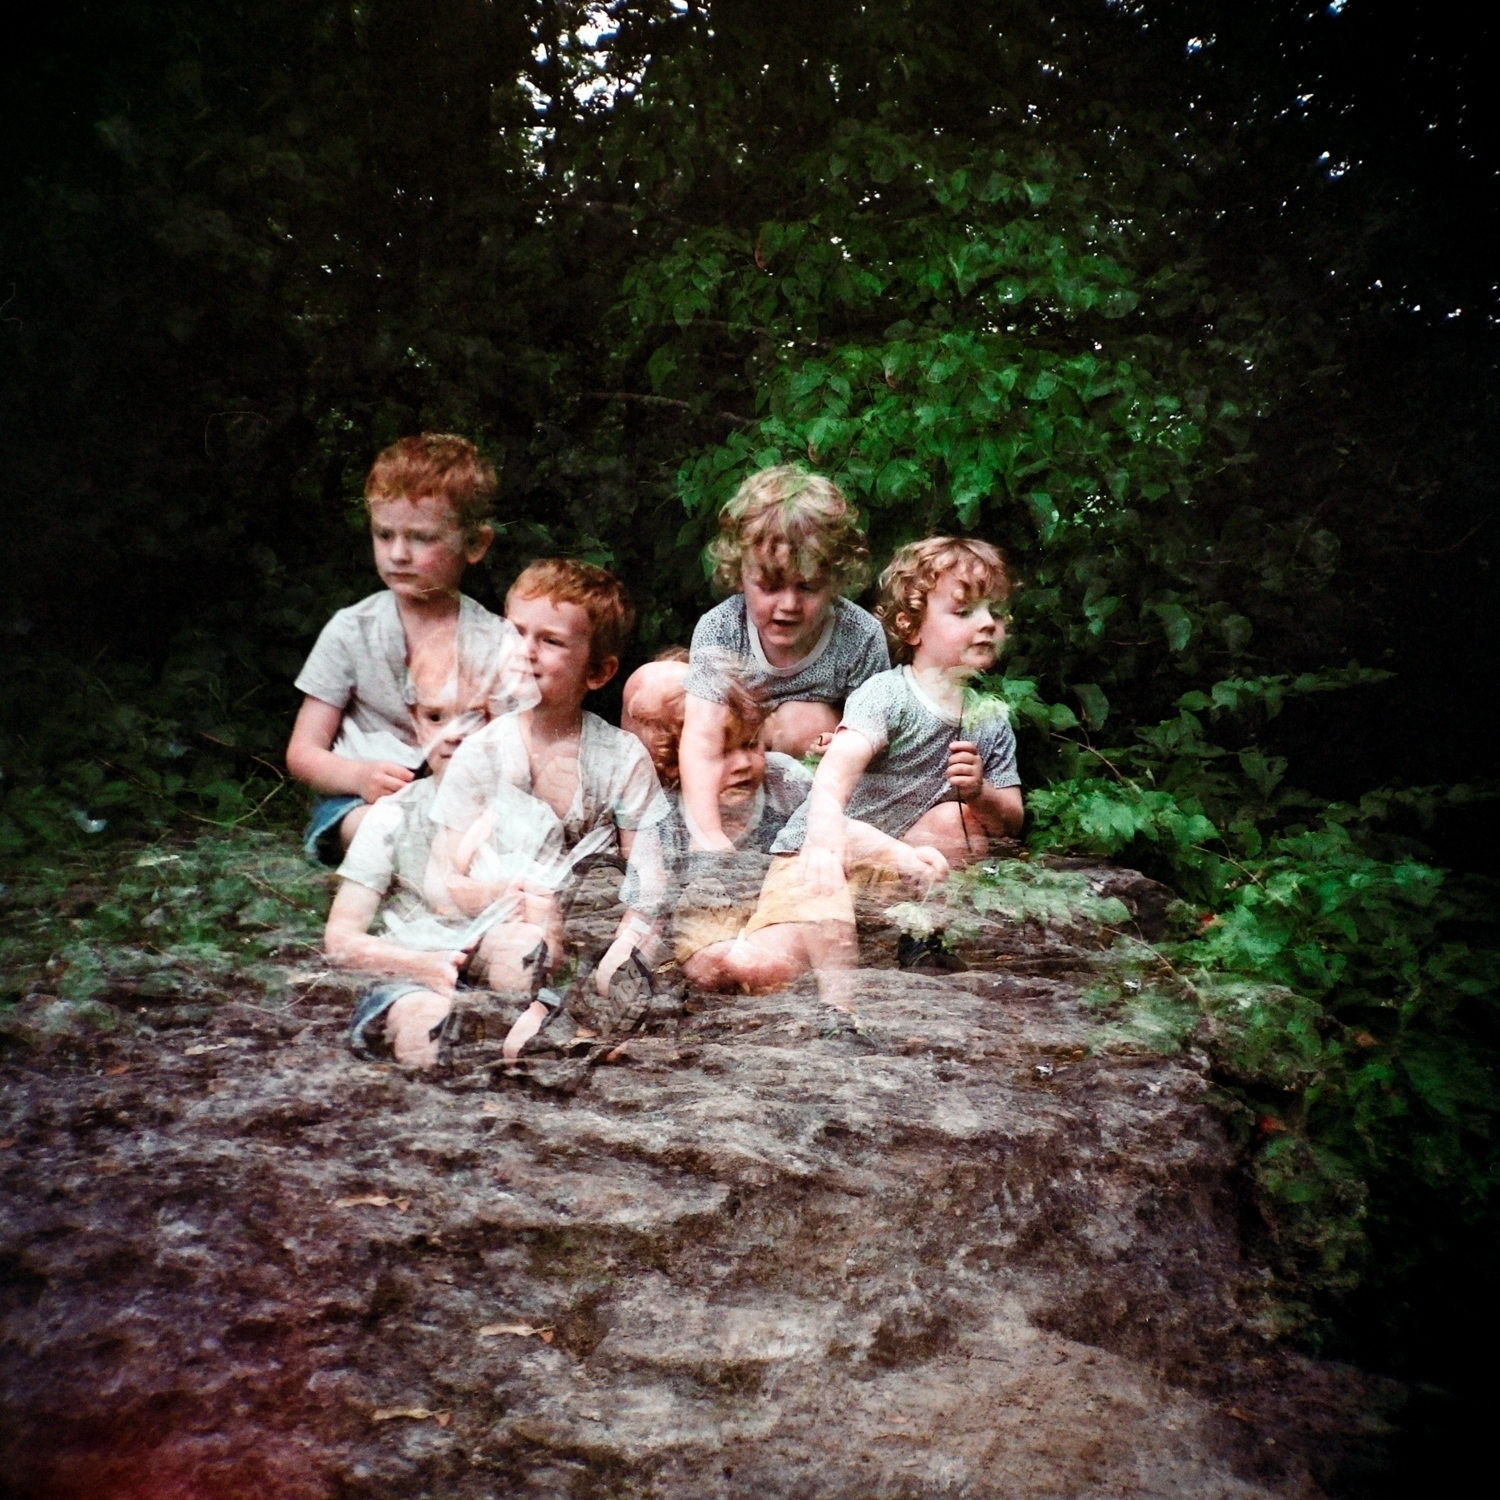 Triple exposure of two children having a picnic in a forest